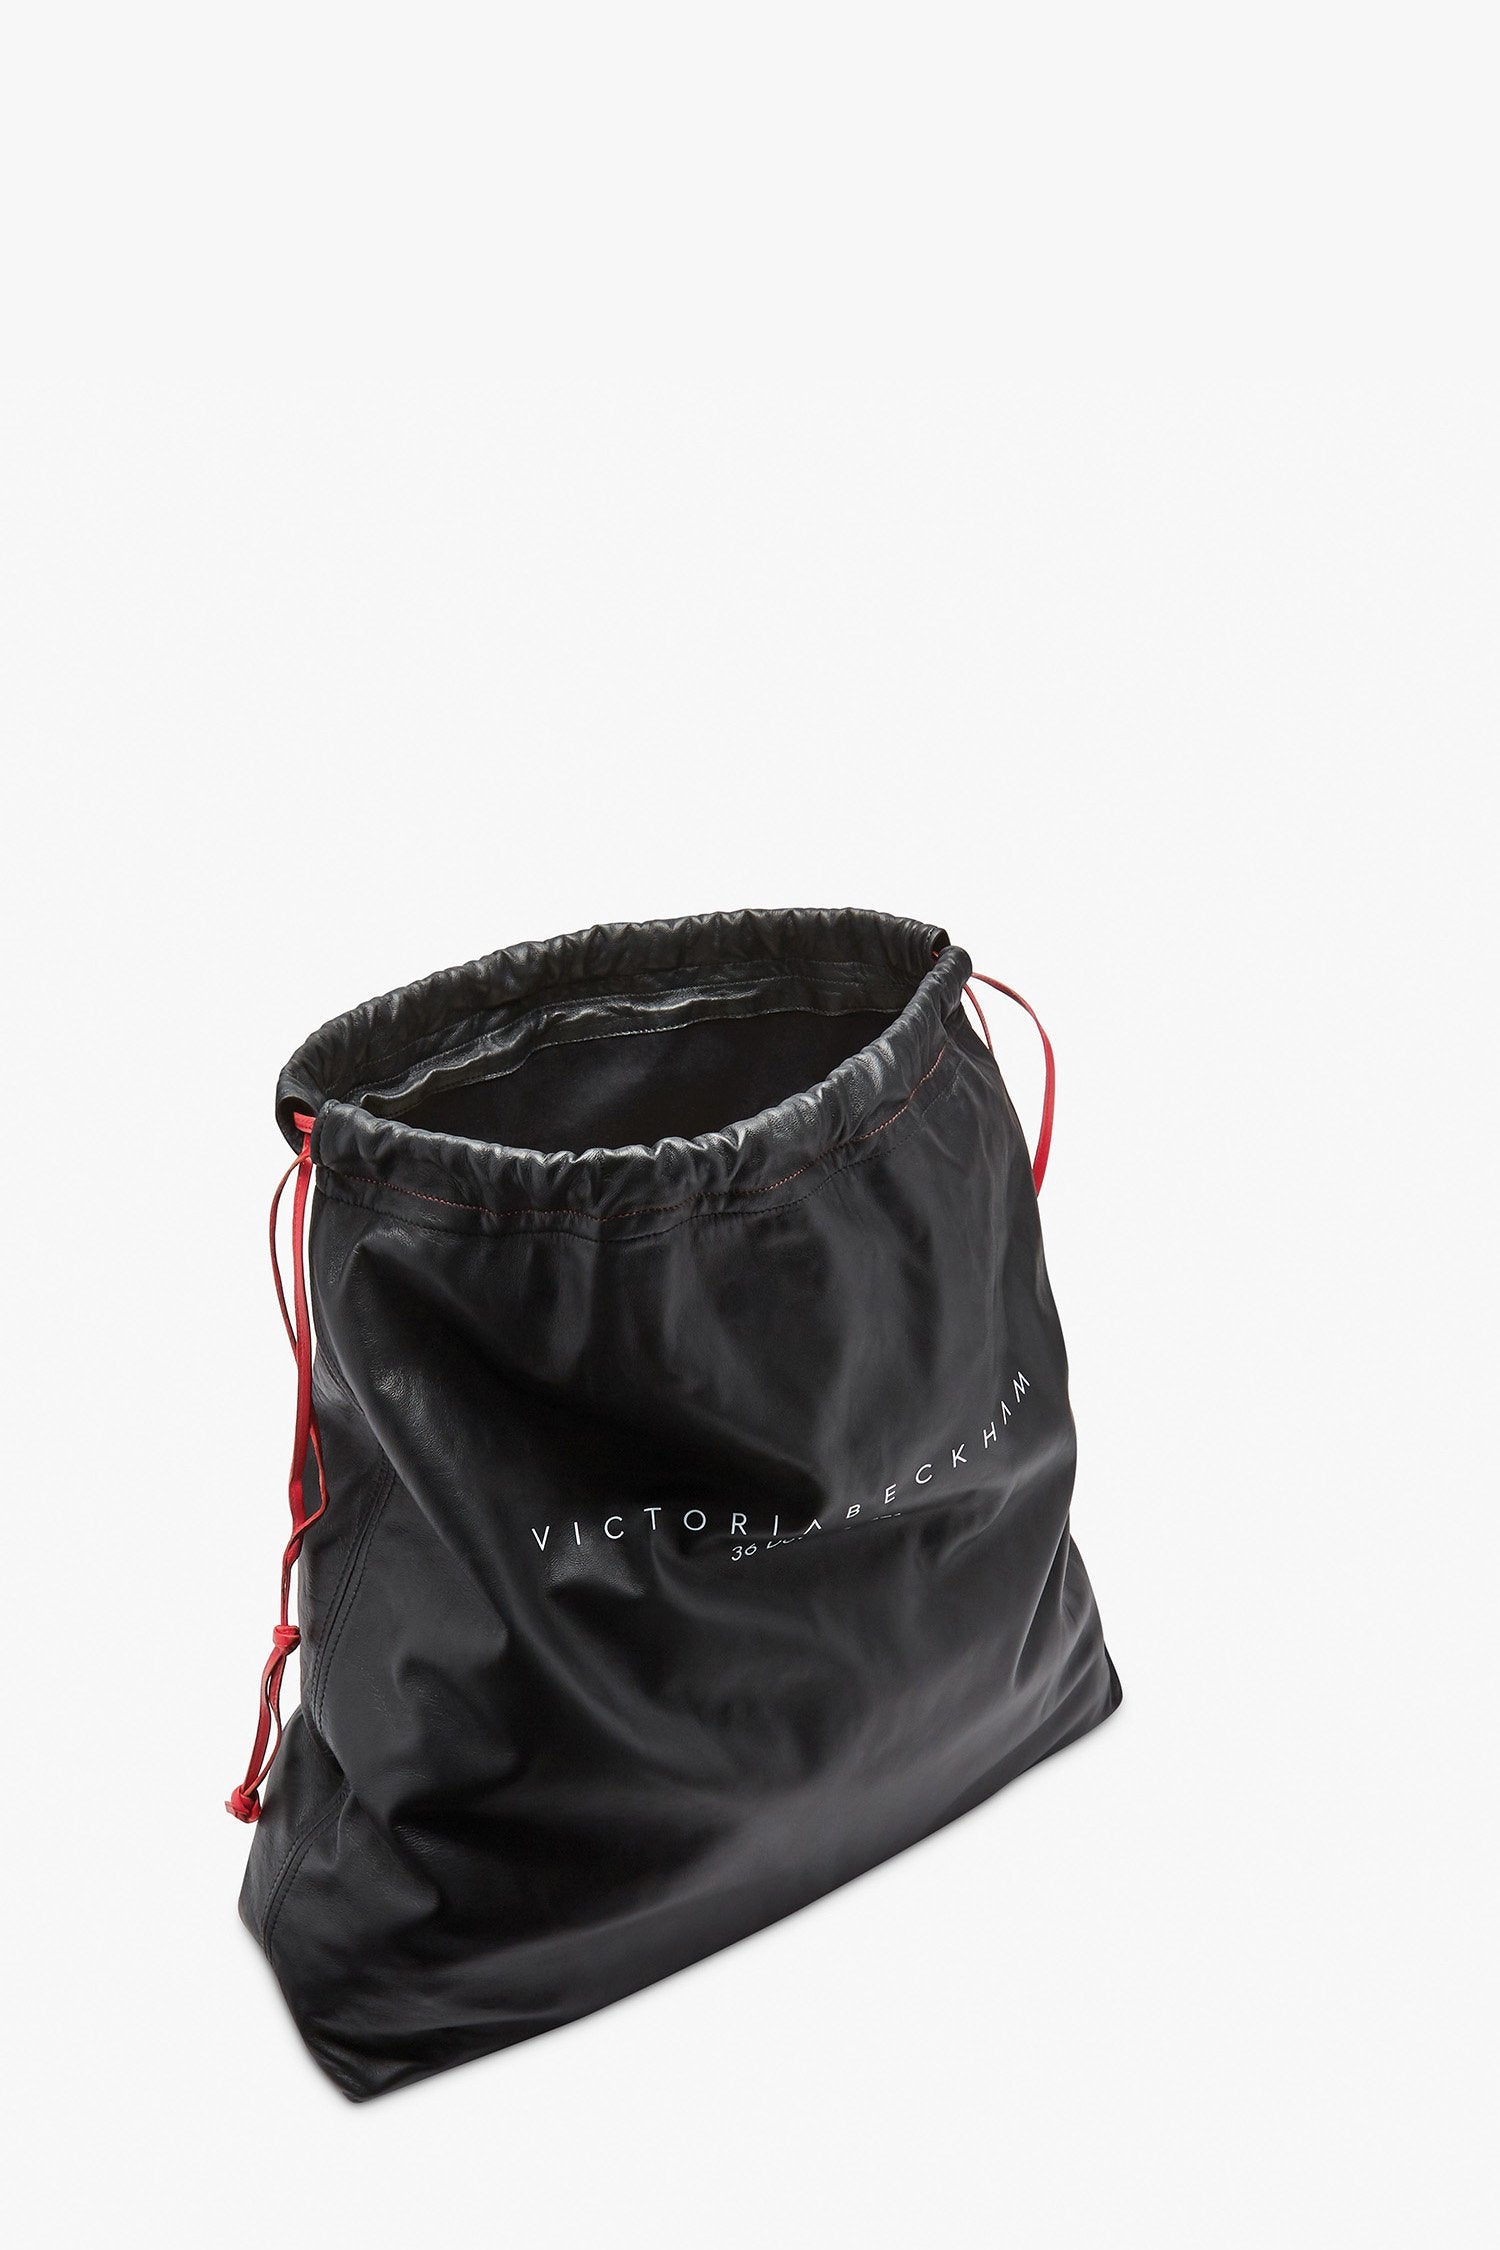 36 Dover St Drawstring Bag in black, perfect for a trip to Tommy Hilfiger or a stylish addition to your Victoria Beckham-inspired look.